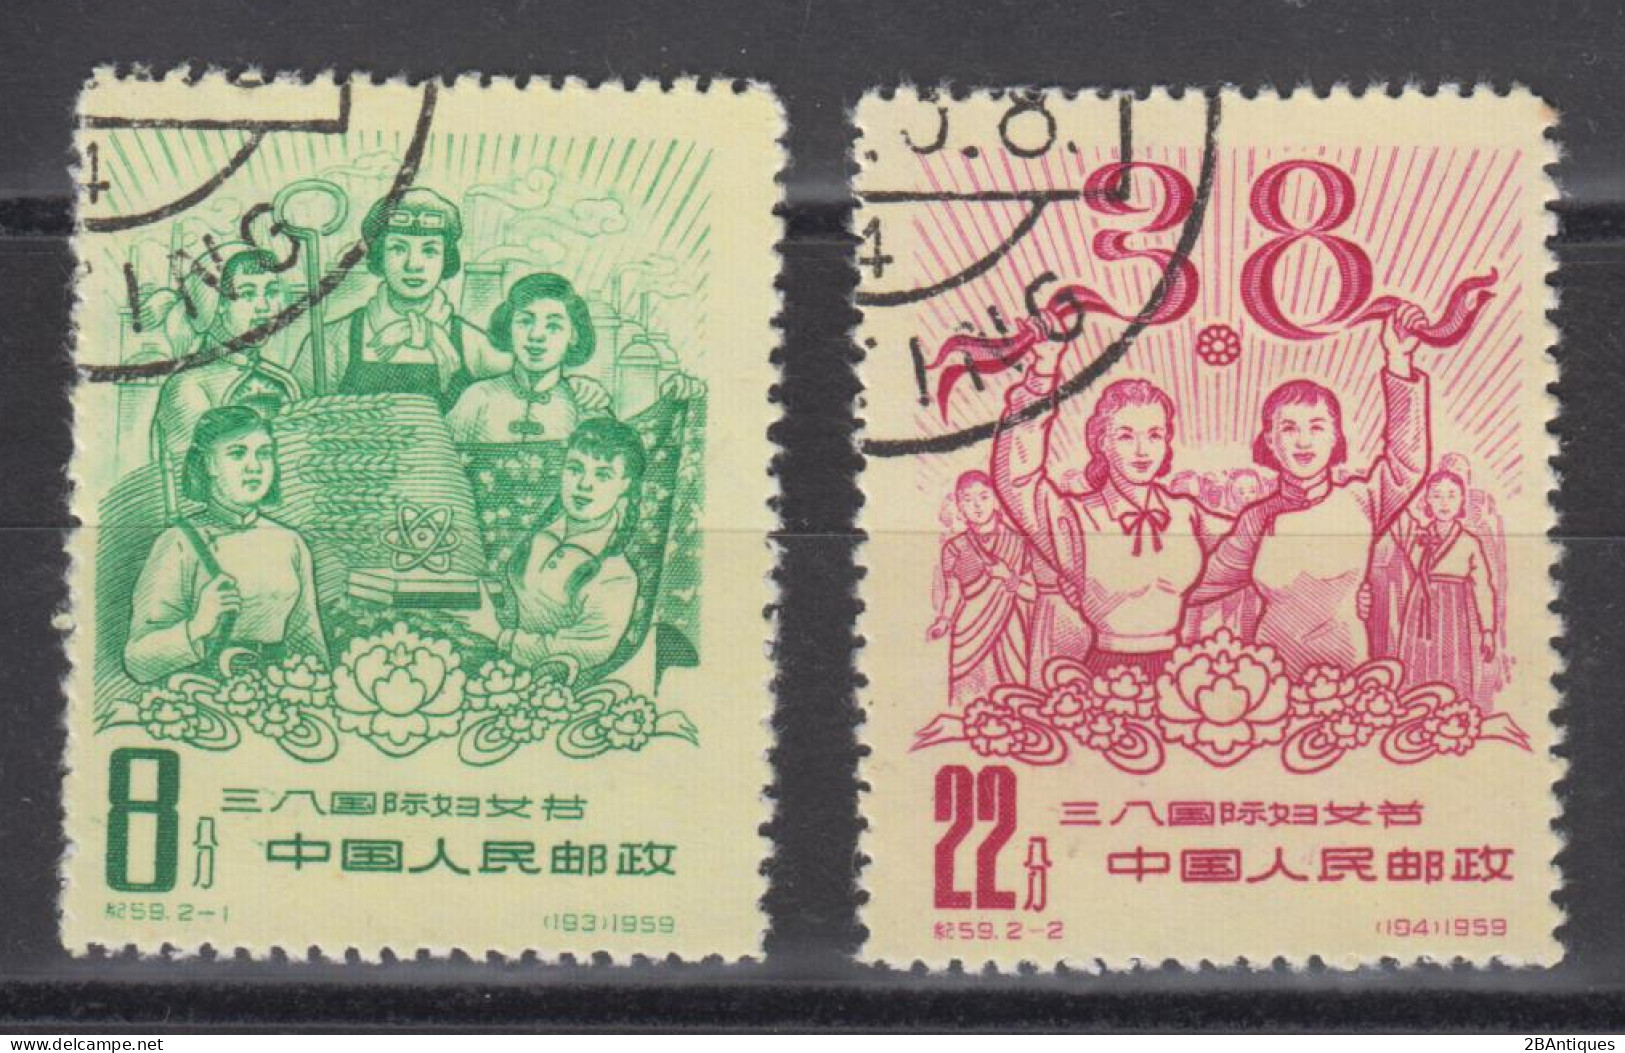 PR CHINA 1959 - International Women's Day CTO XF - Used Stamps